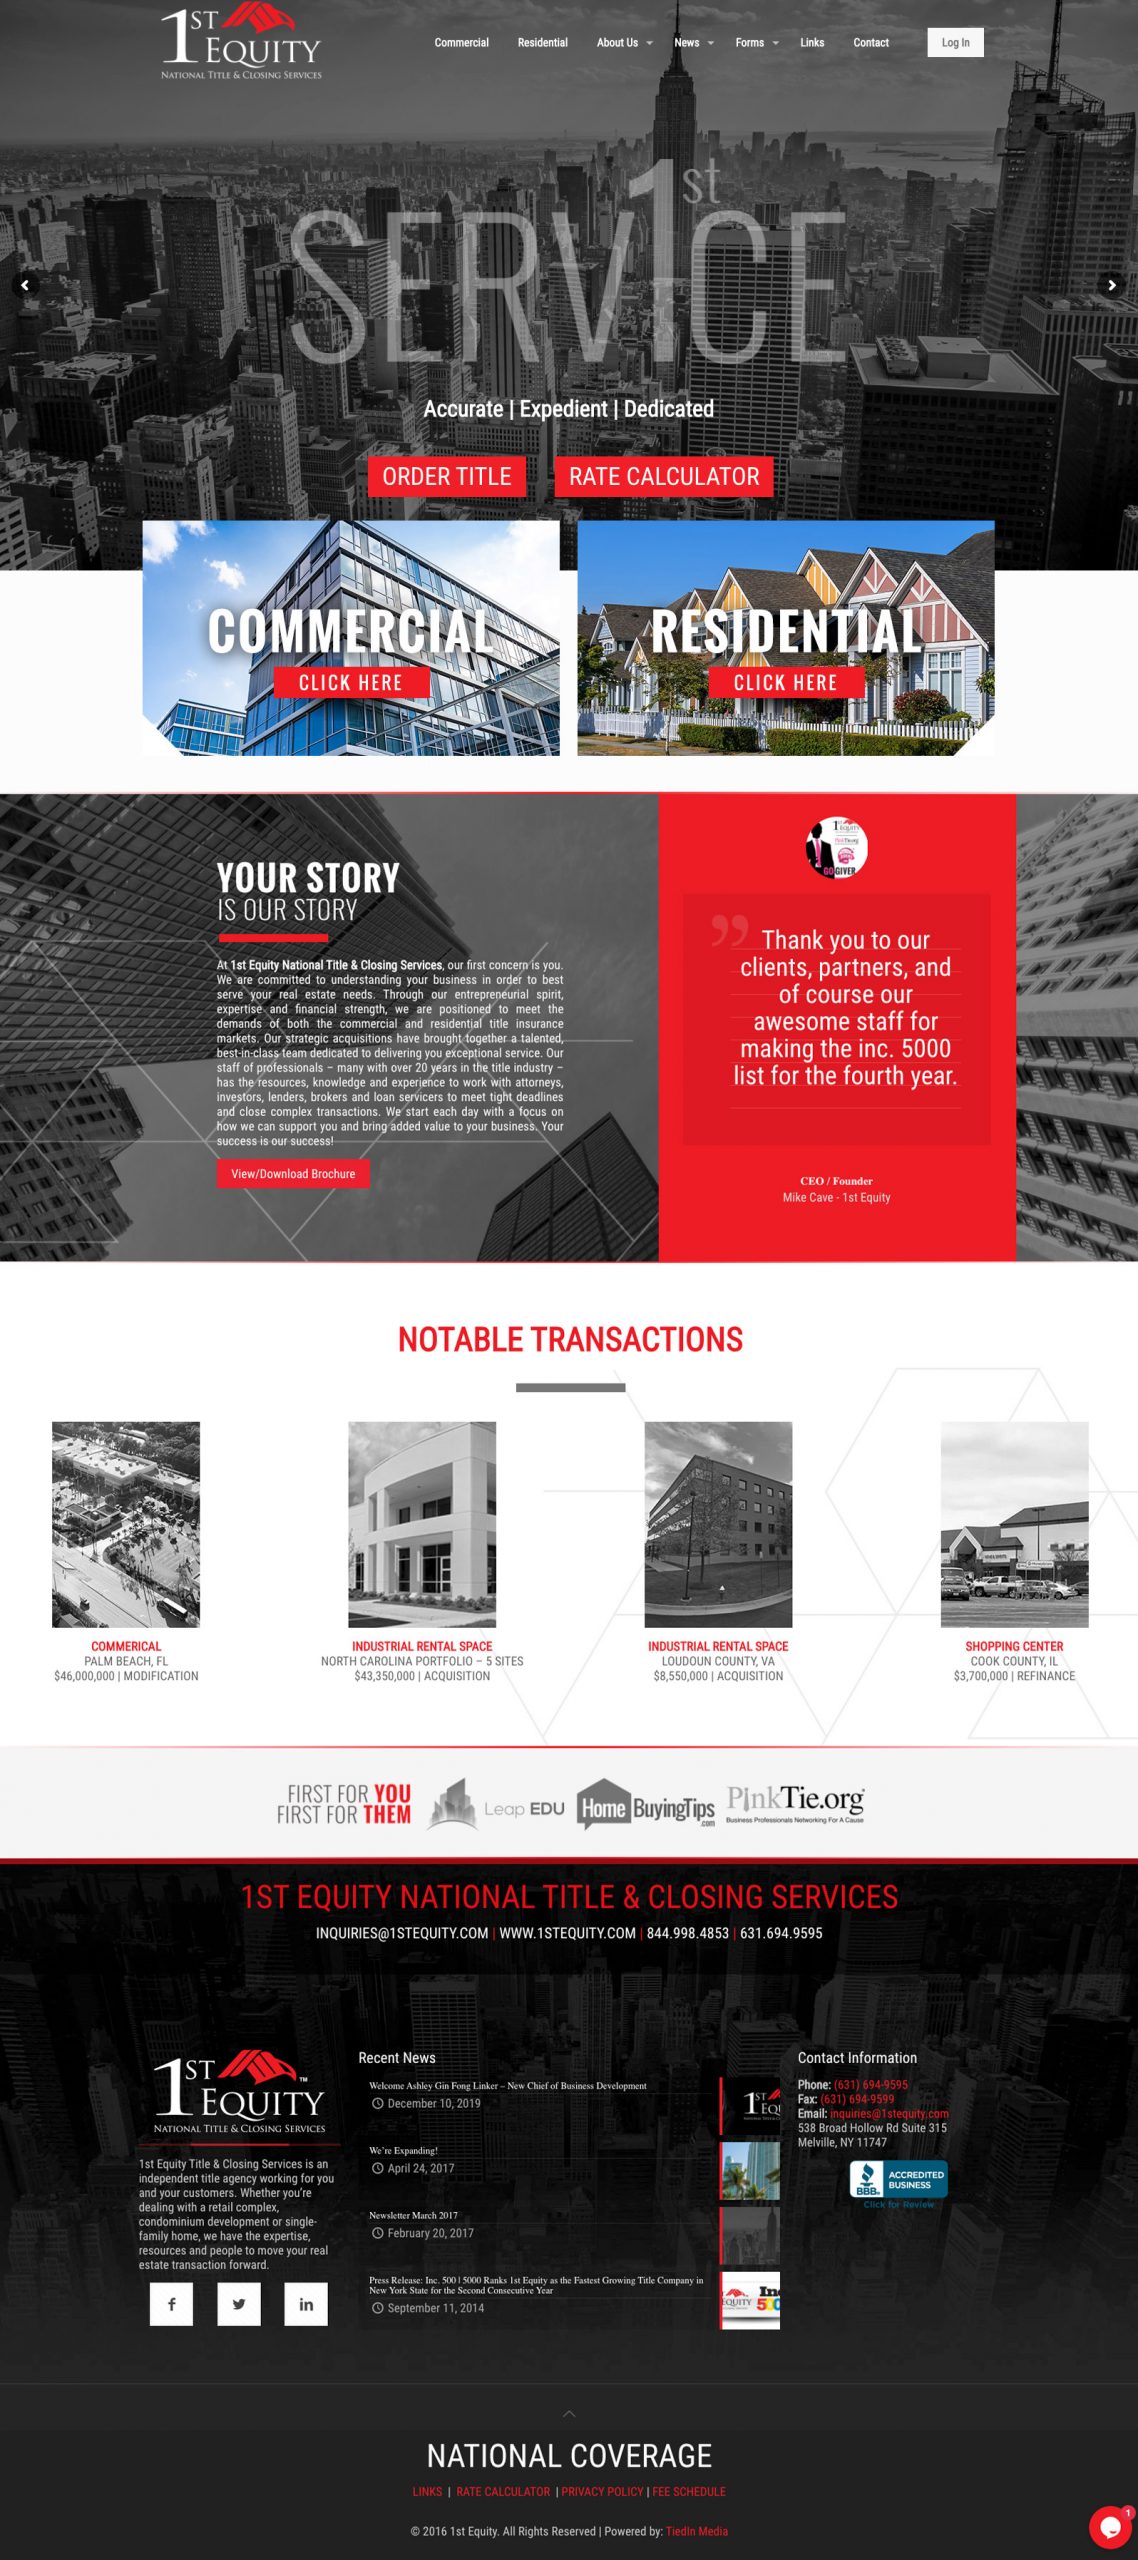 1st-equity-homepage-scaled